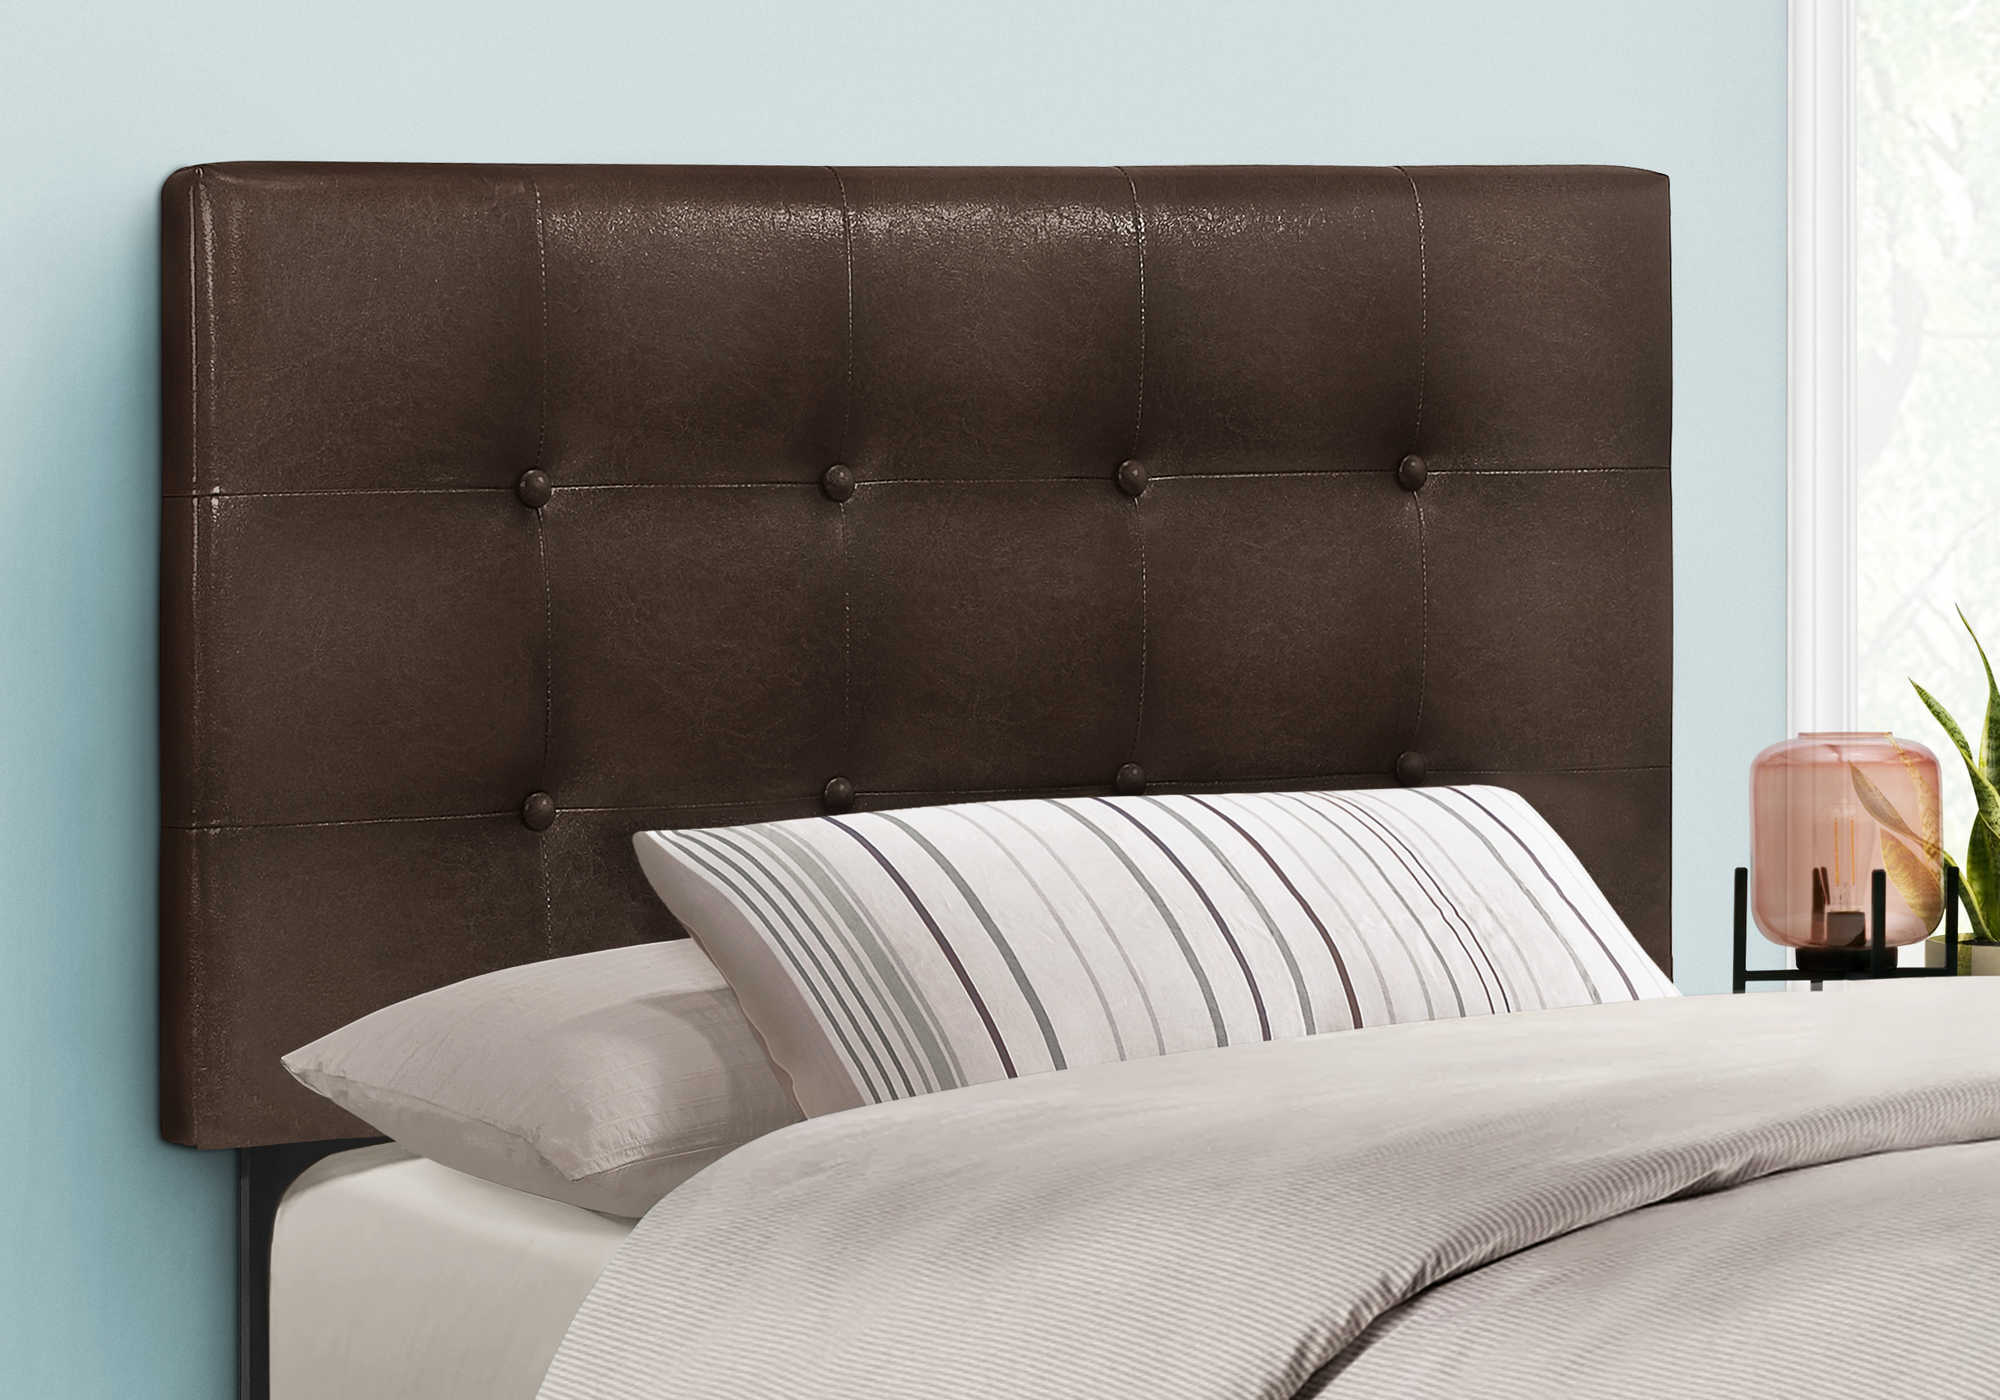 BED - TWIN SIZE / BROWN LEATHER-LOOK HEADBOARD ONLY